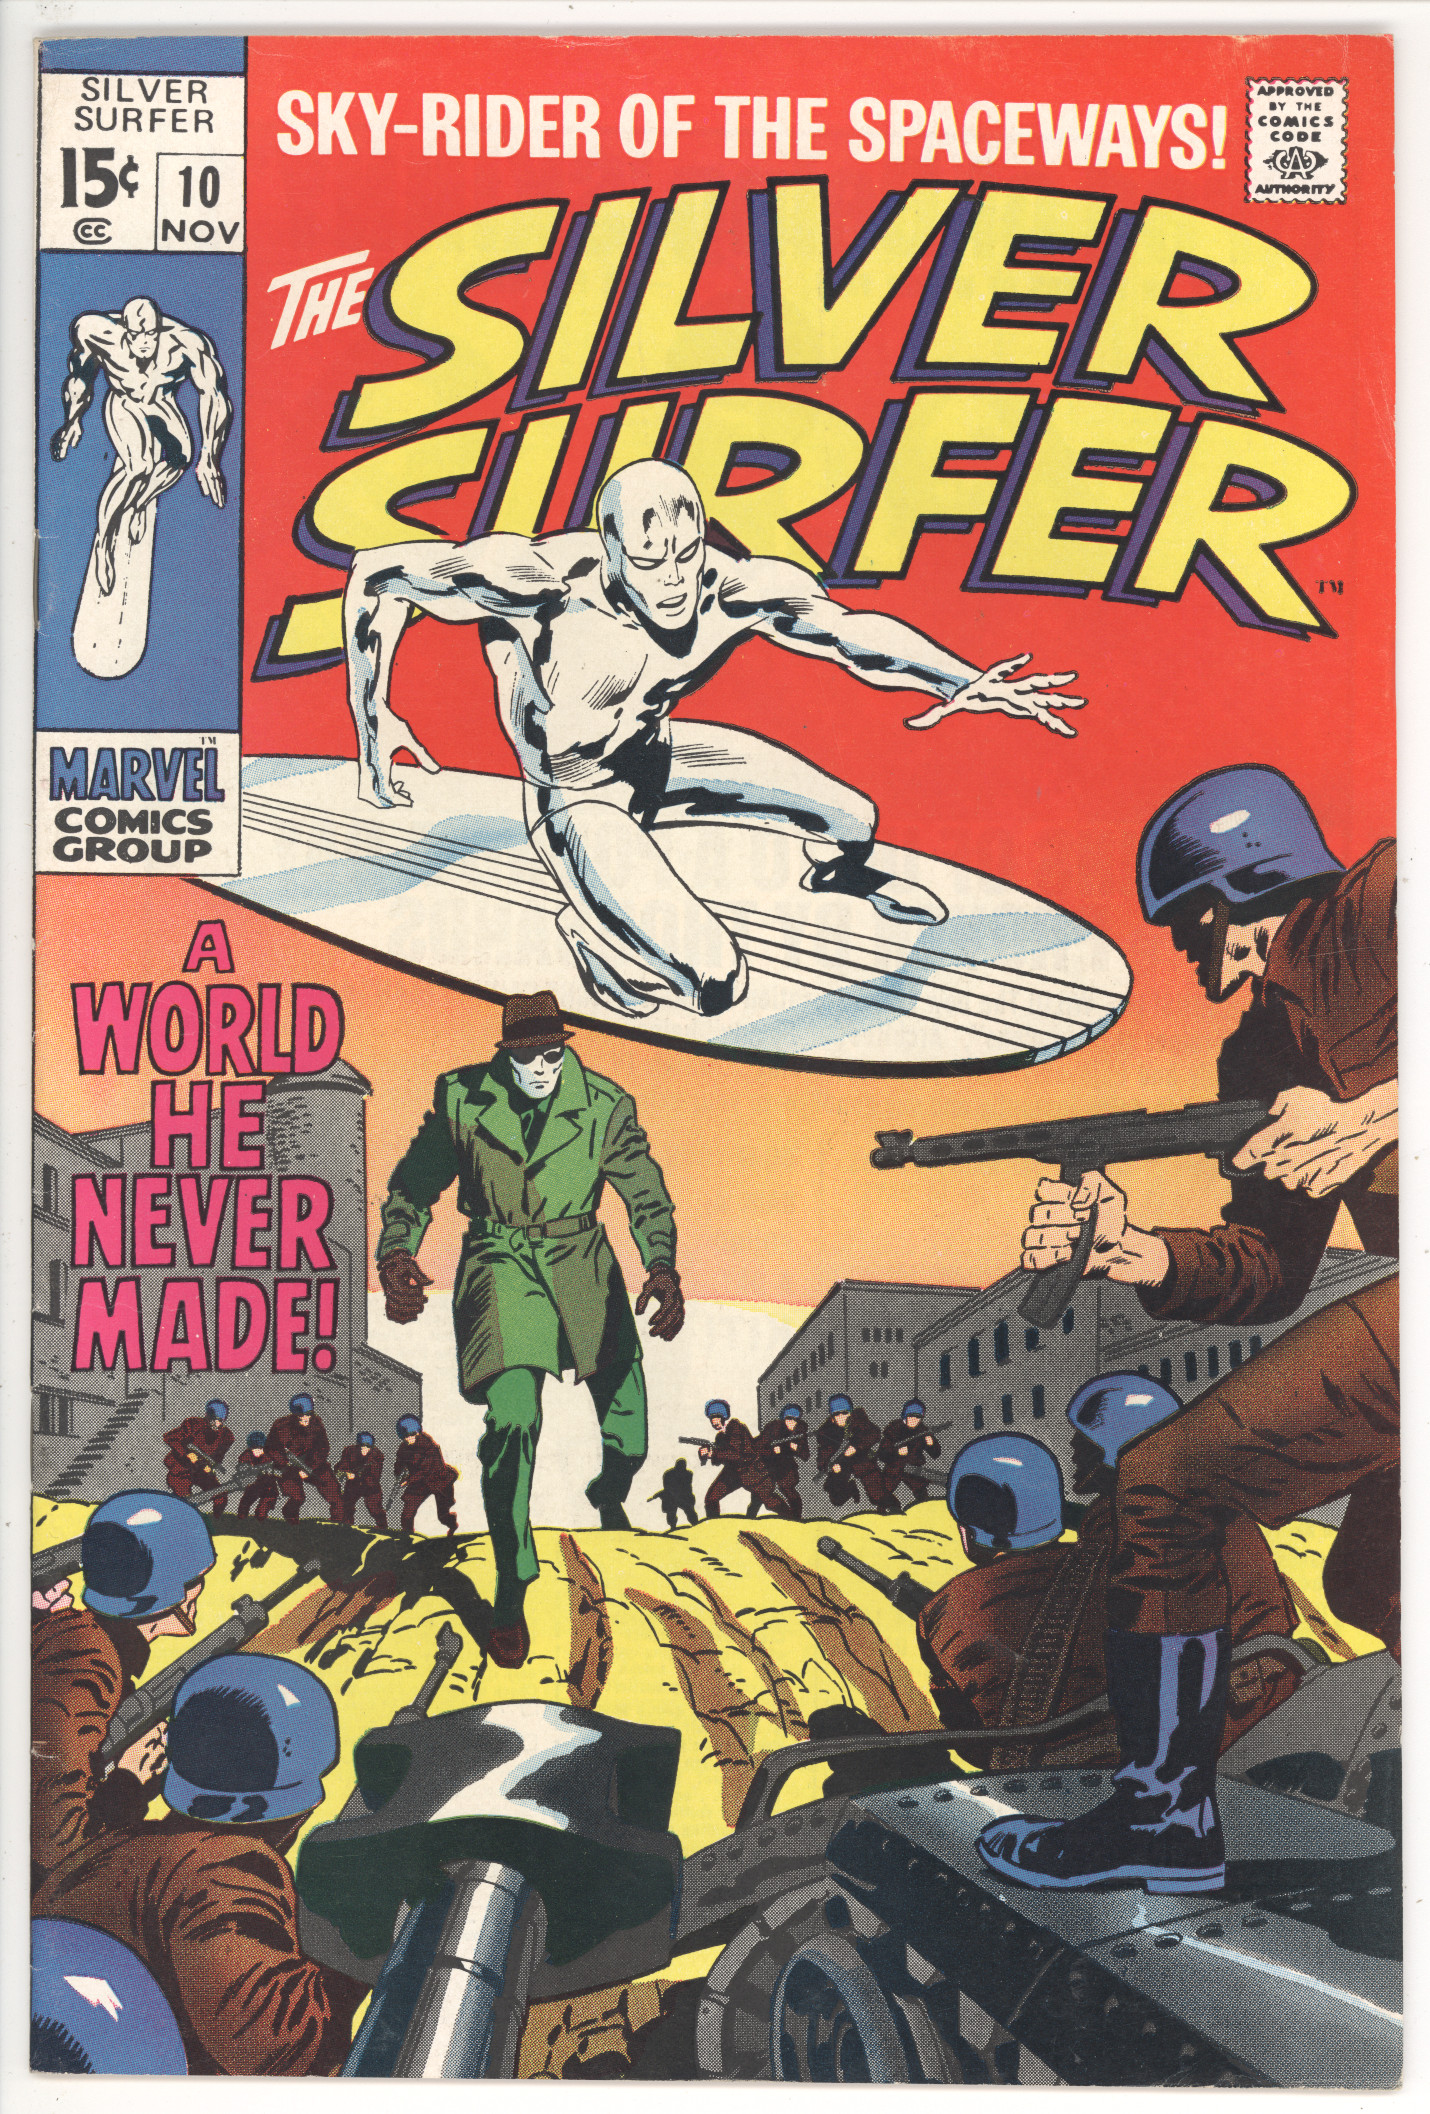 Silver Surfer #10 front